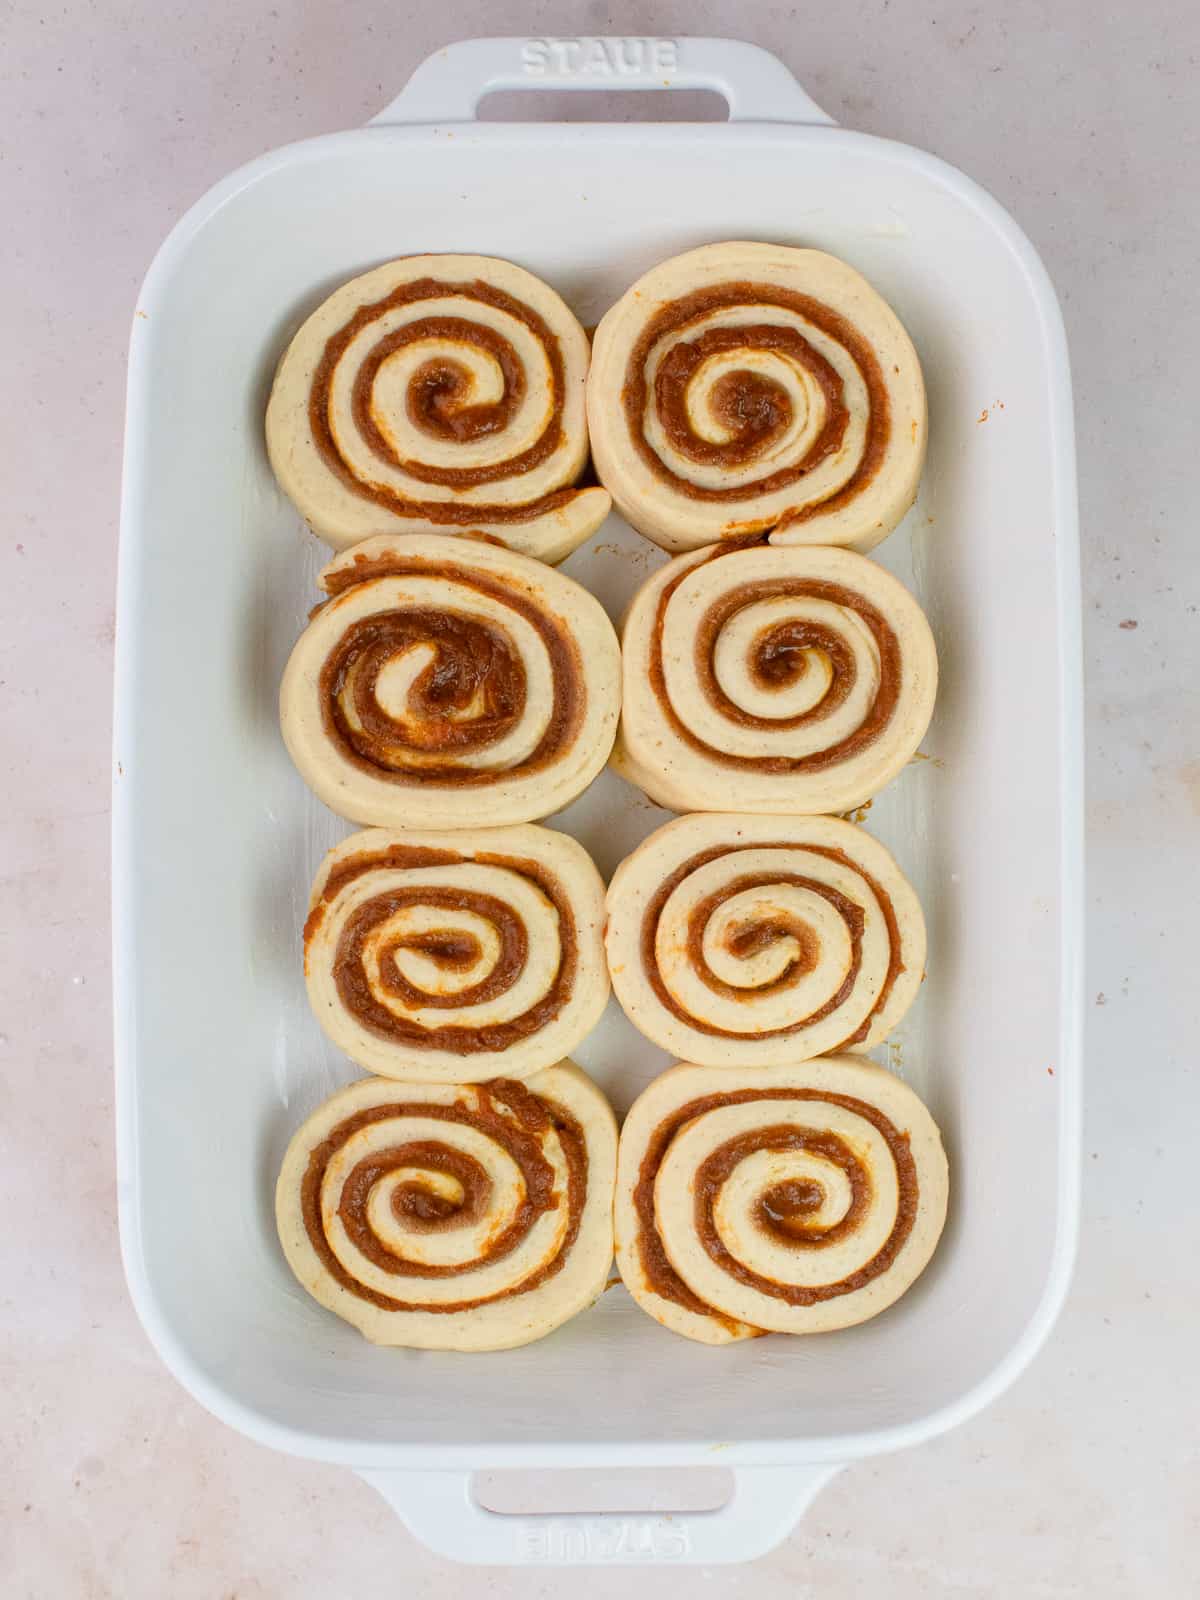 Cinnamon rolls in baking dish after proofing